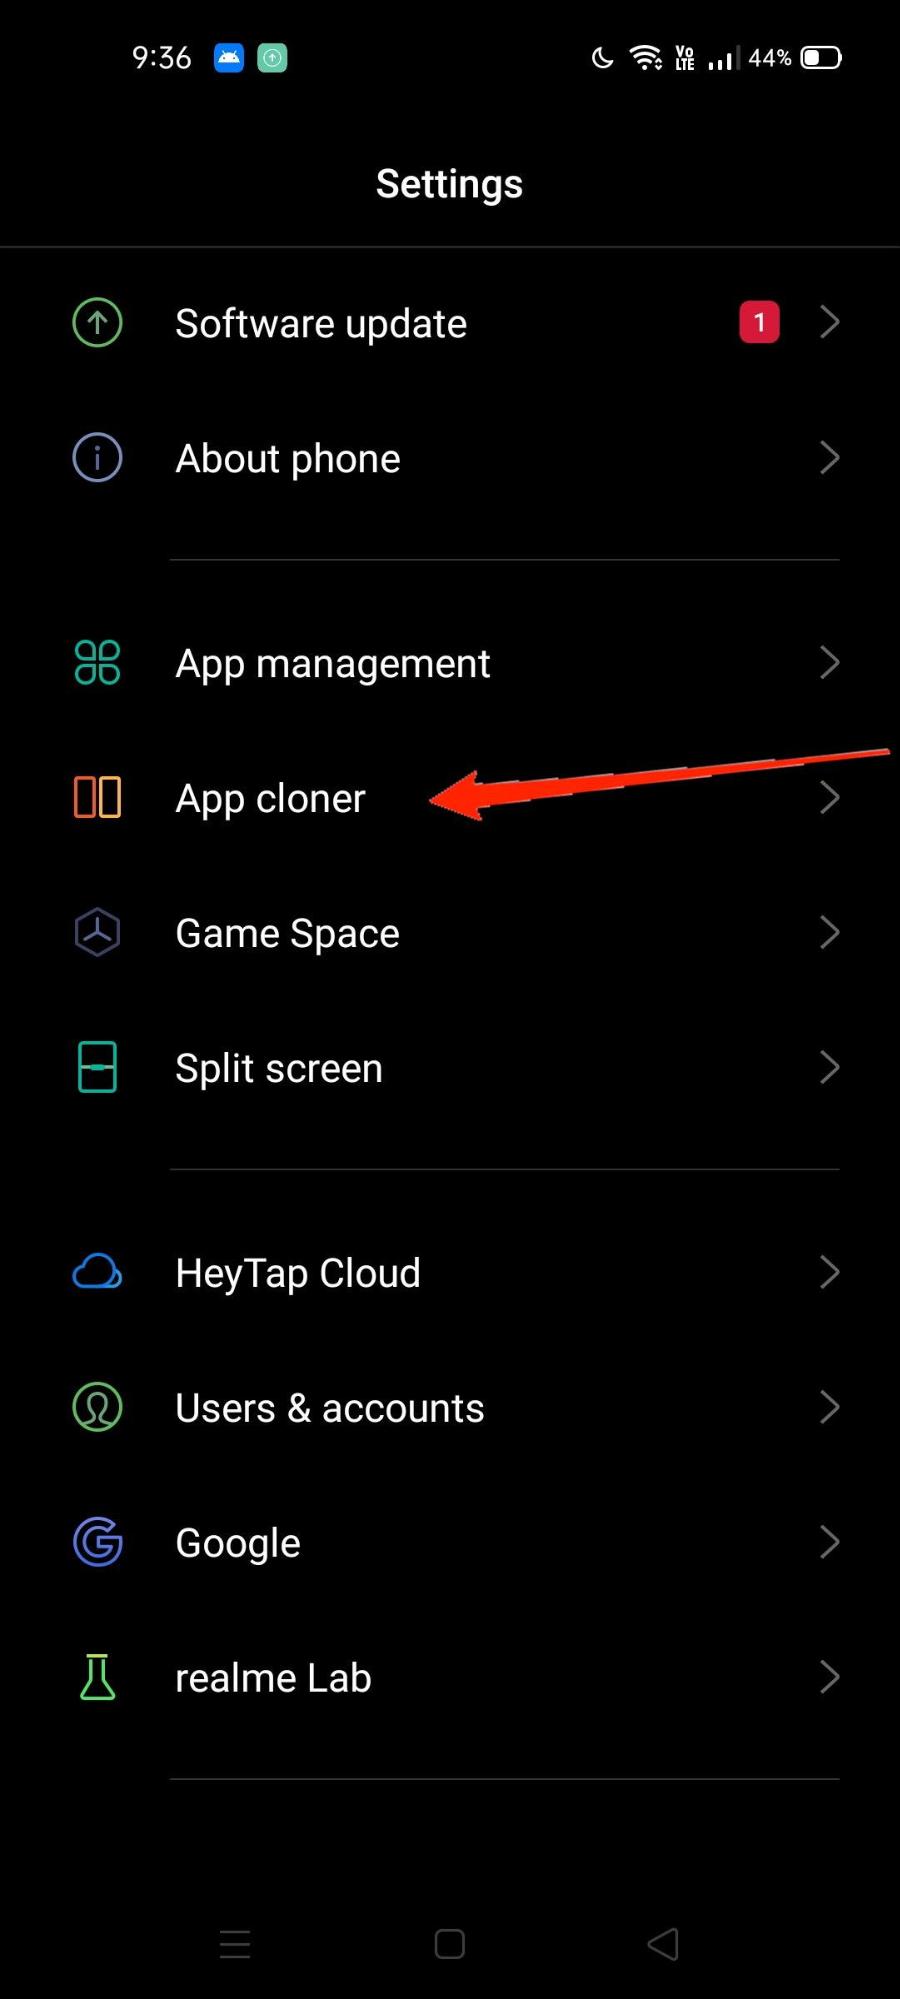 Open device settings and navigate to app cloner